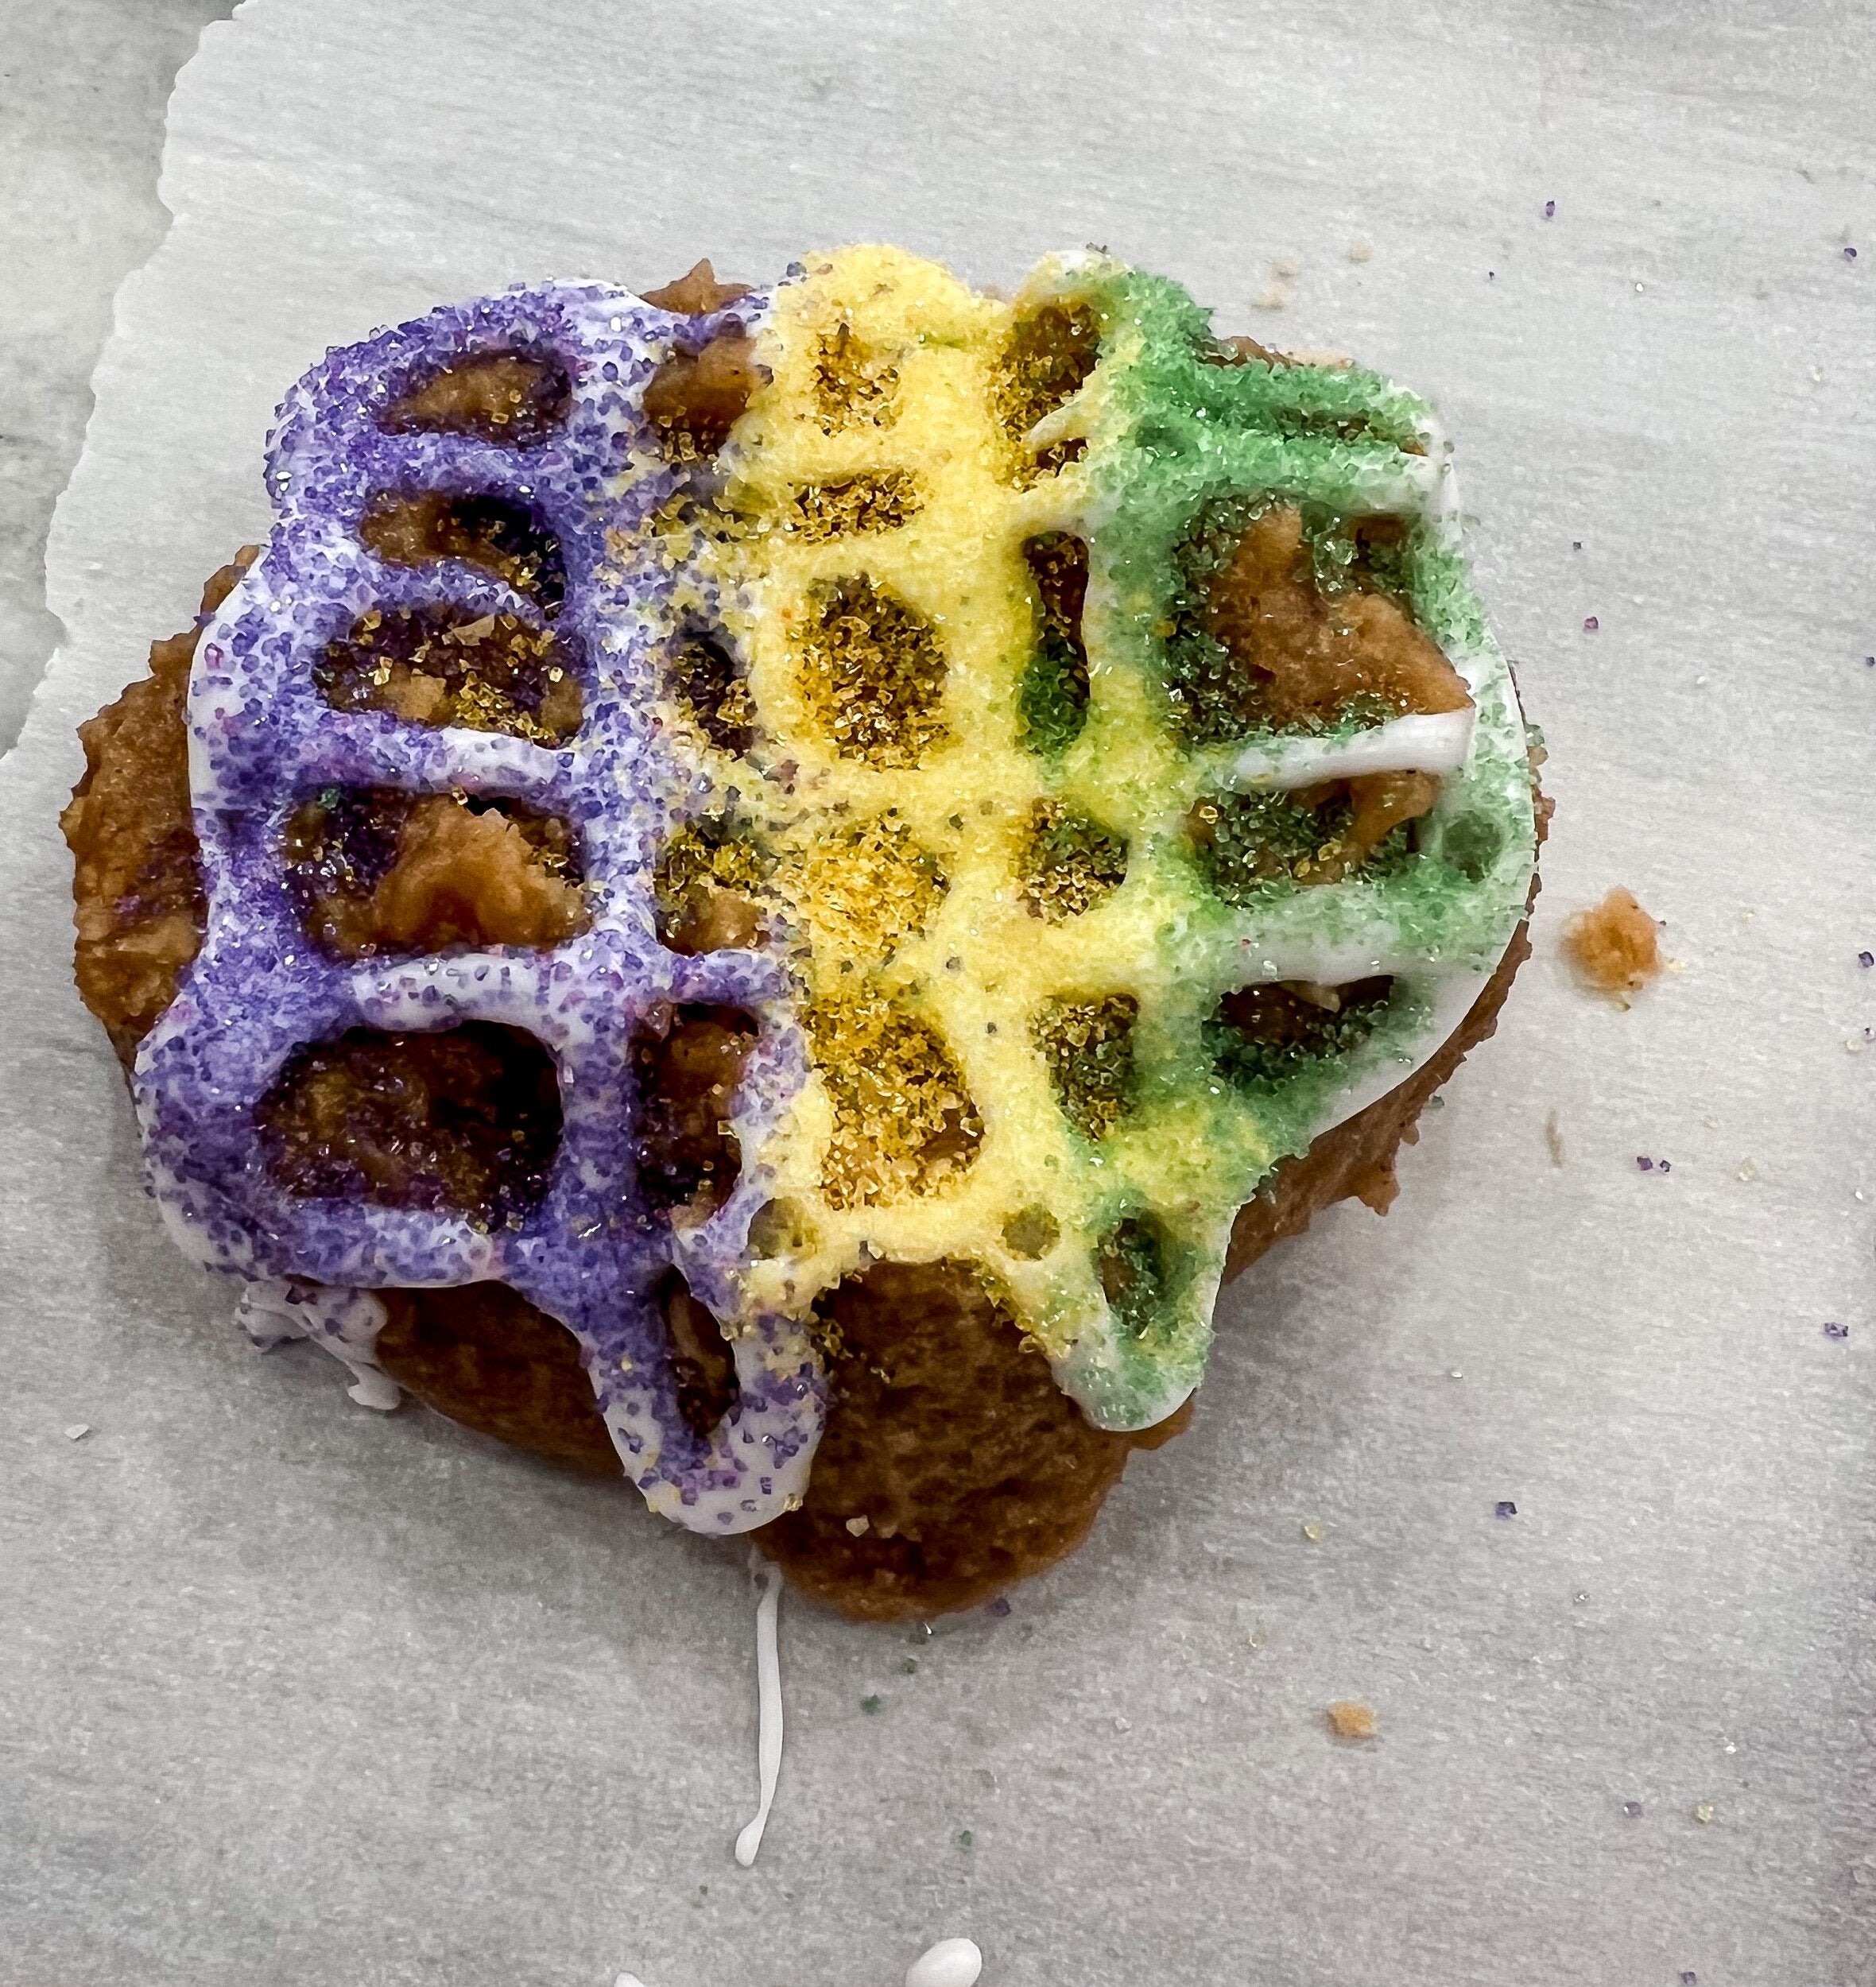 IT'S KING CAKE SEASON 💫 & WE'RE NOW OFFERING OUR DELICIOUS SUPER PRALINE  KING CAKE'S!! THEY'RE ON SALE NOW FOR PURCHASE & SHIPPING IS… | Instagram